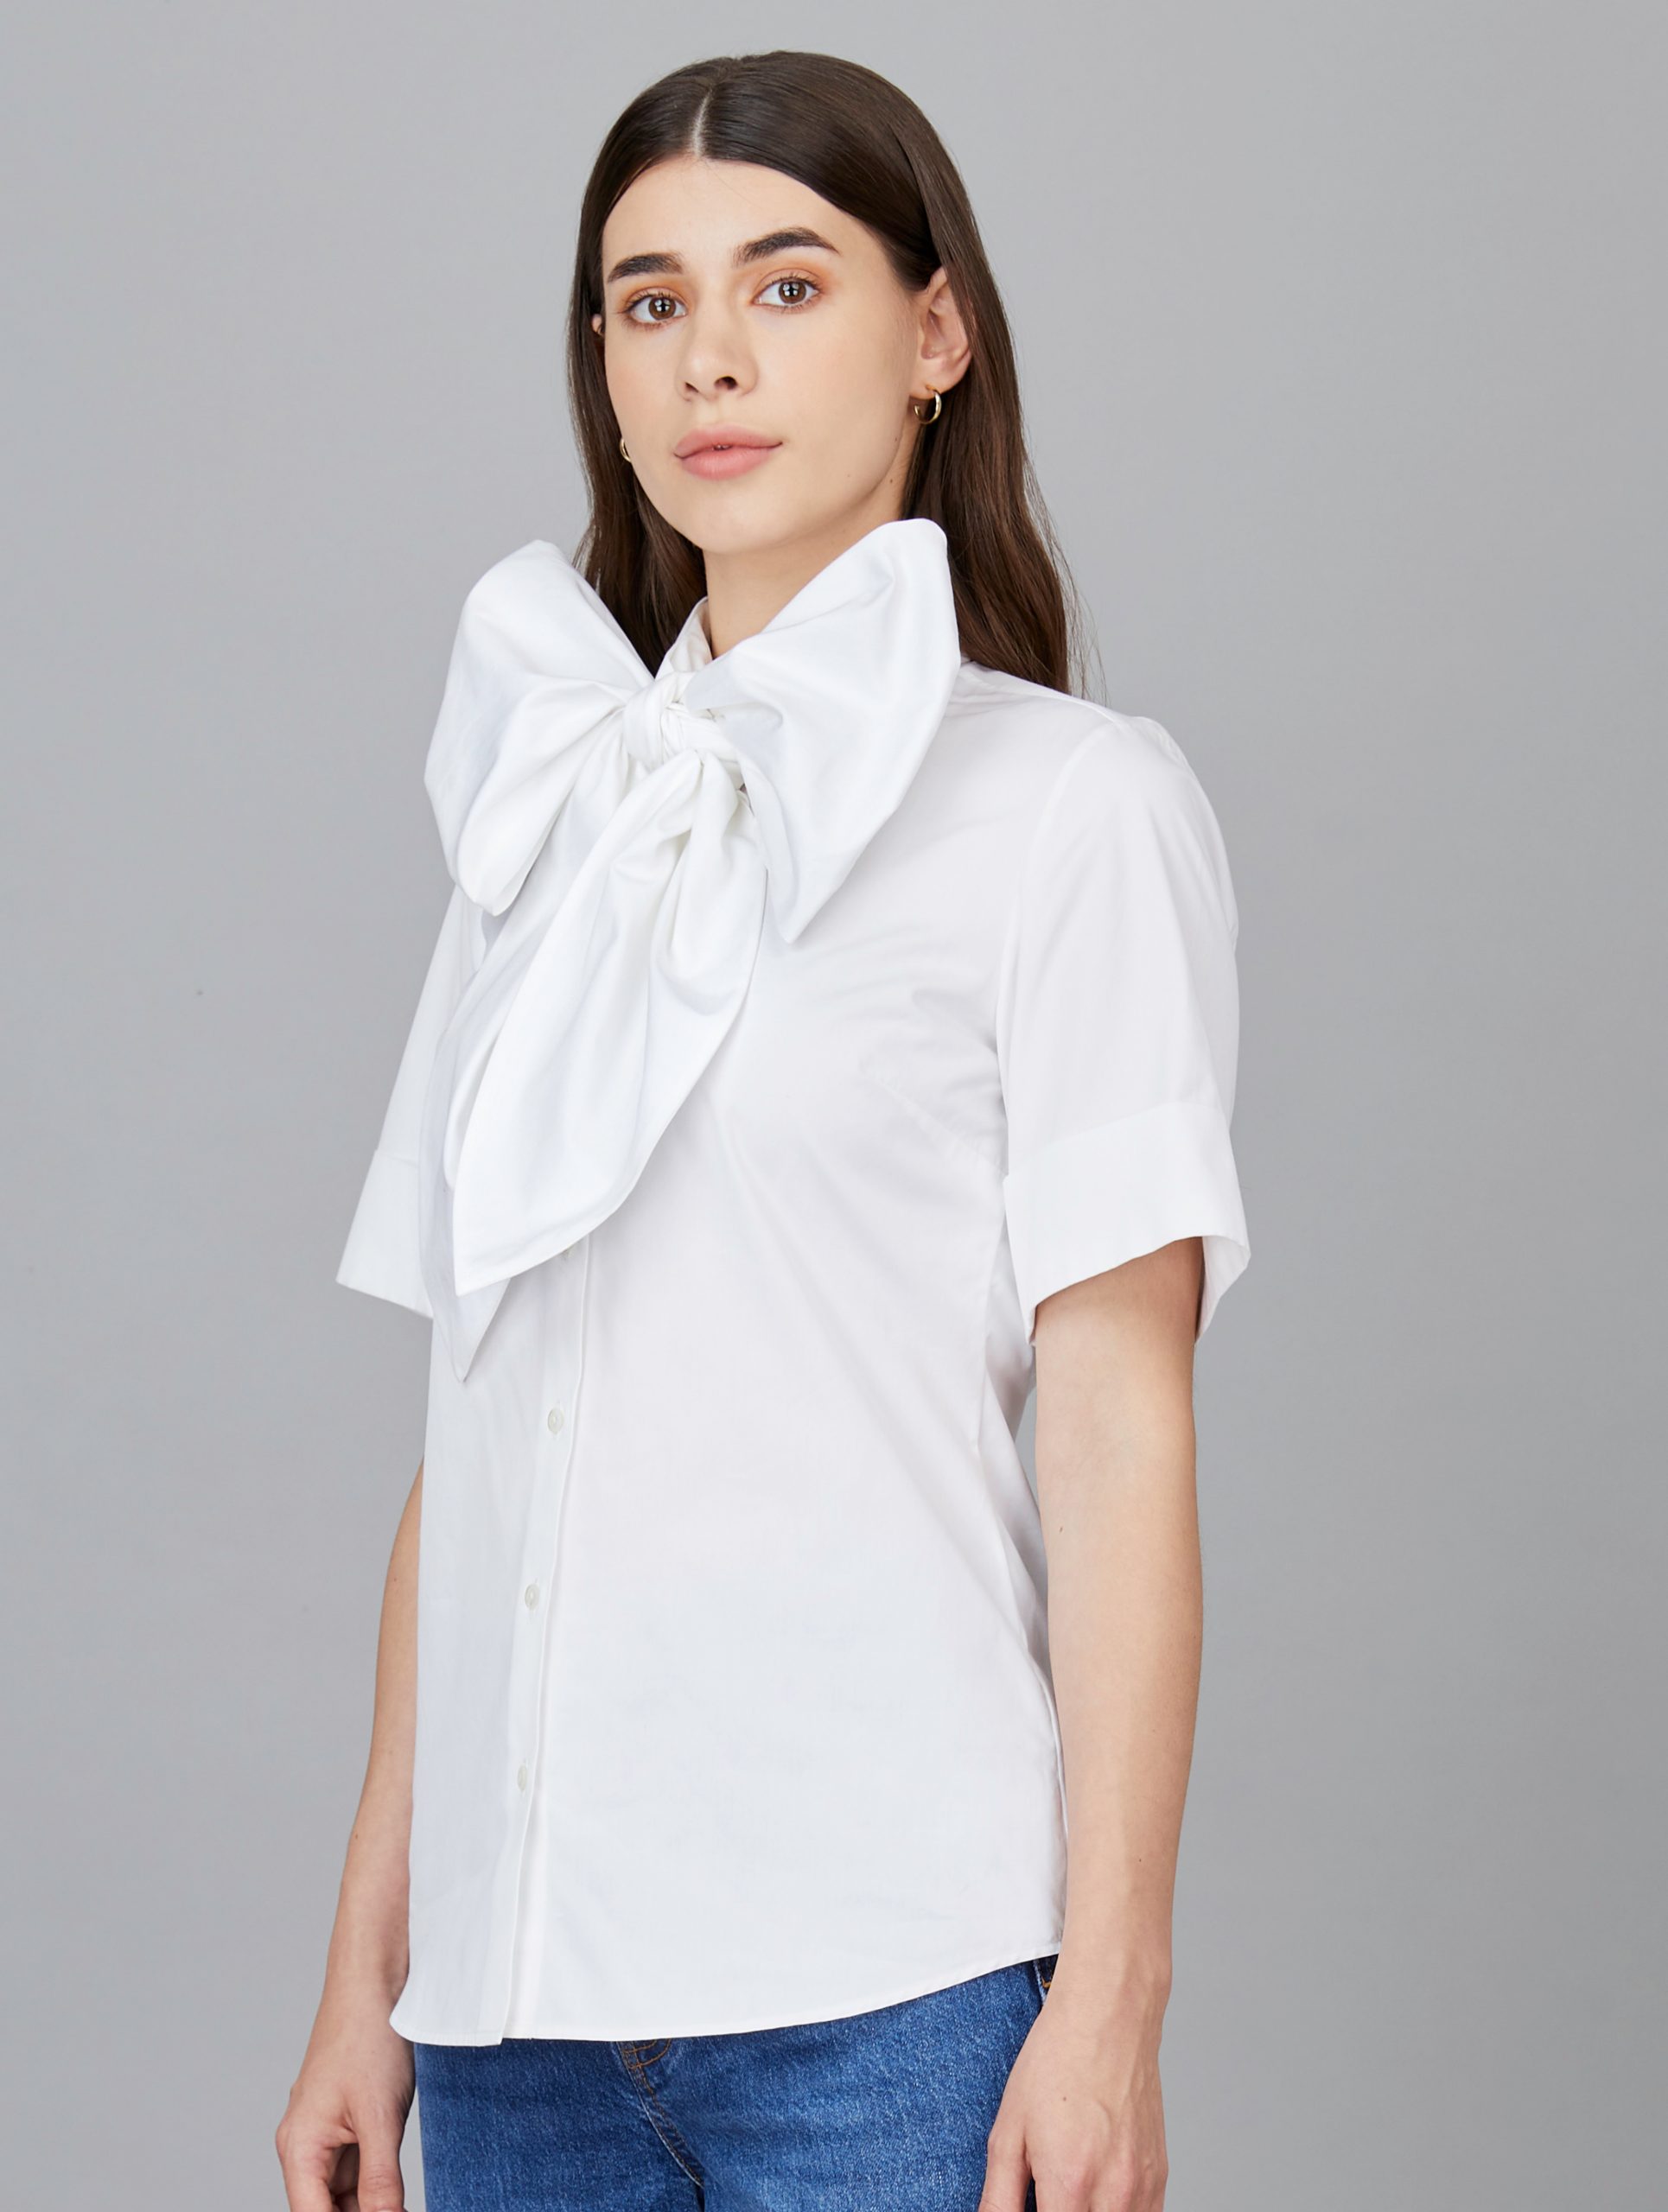 Big Bow Shirt in White